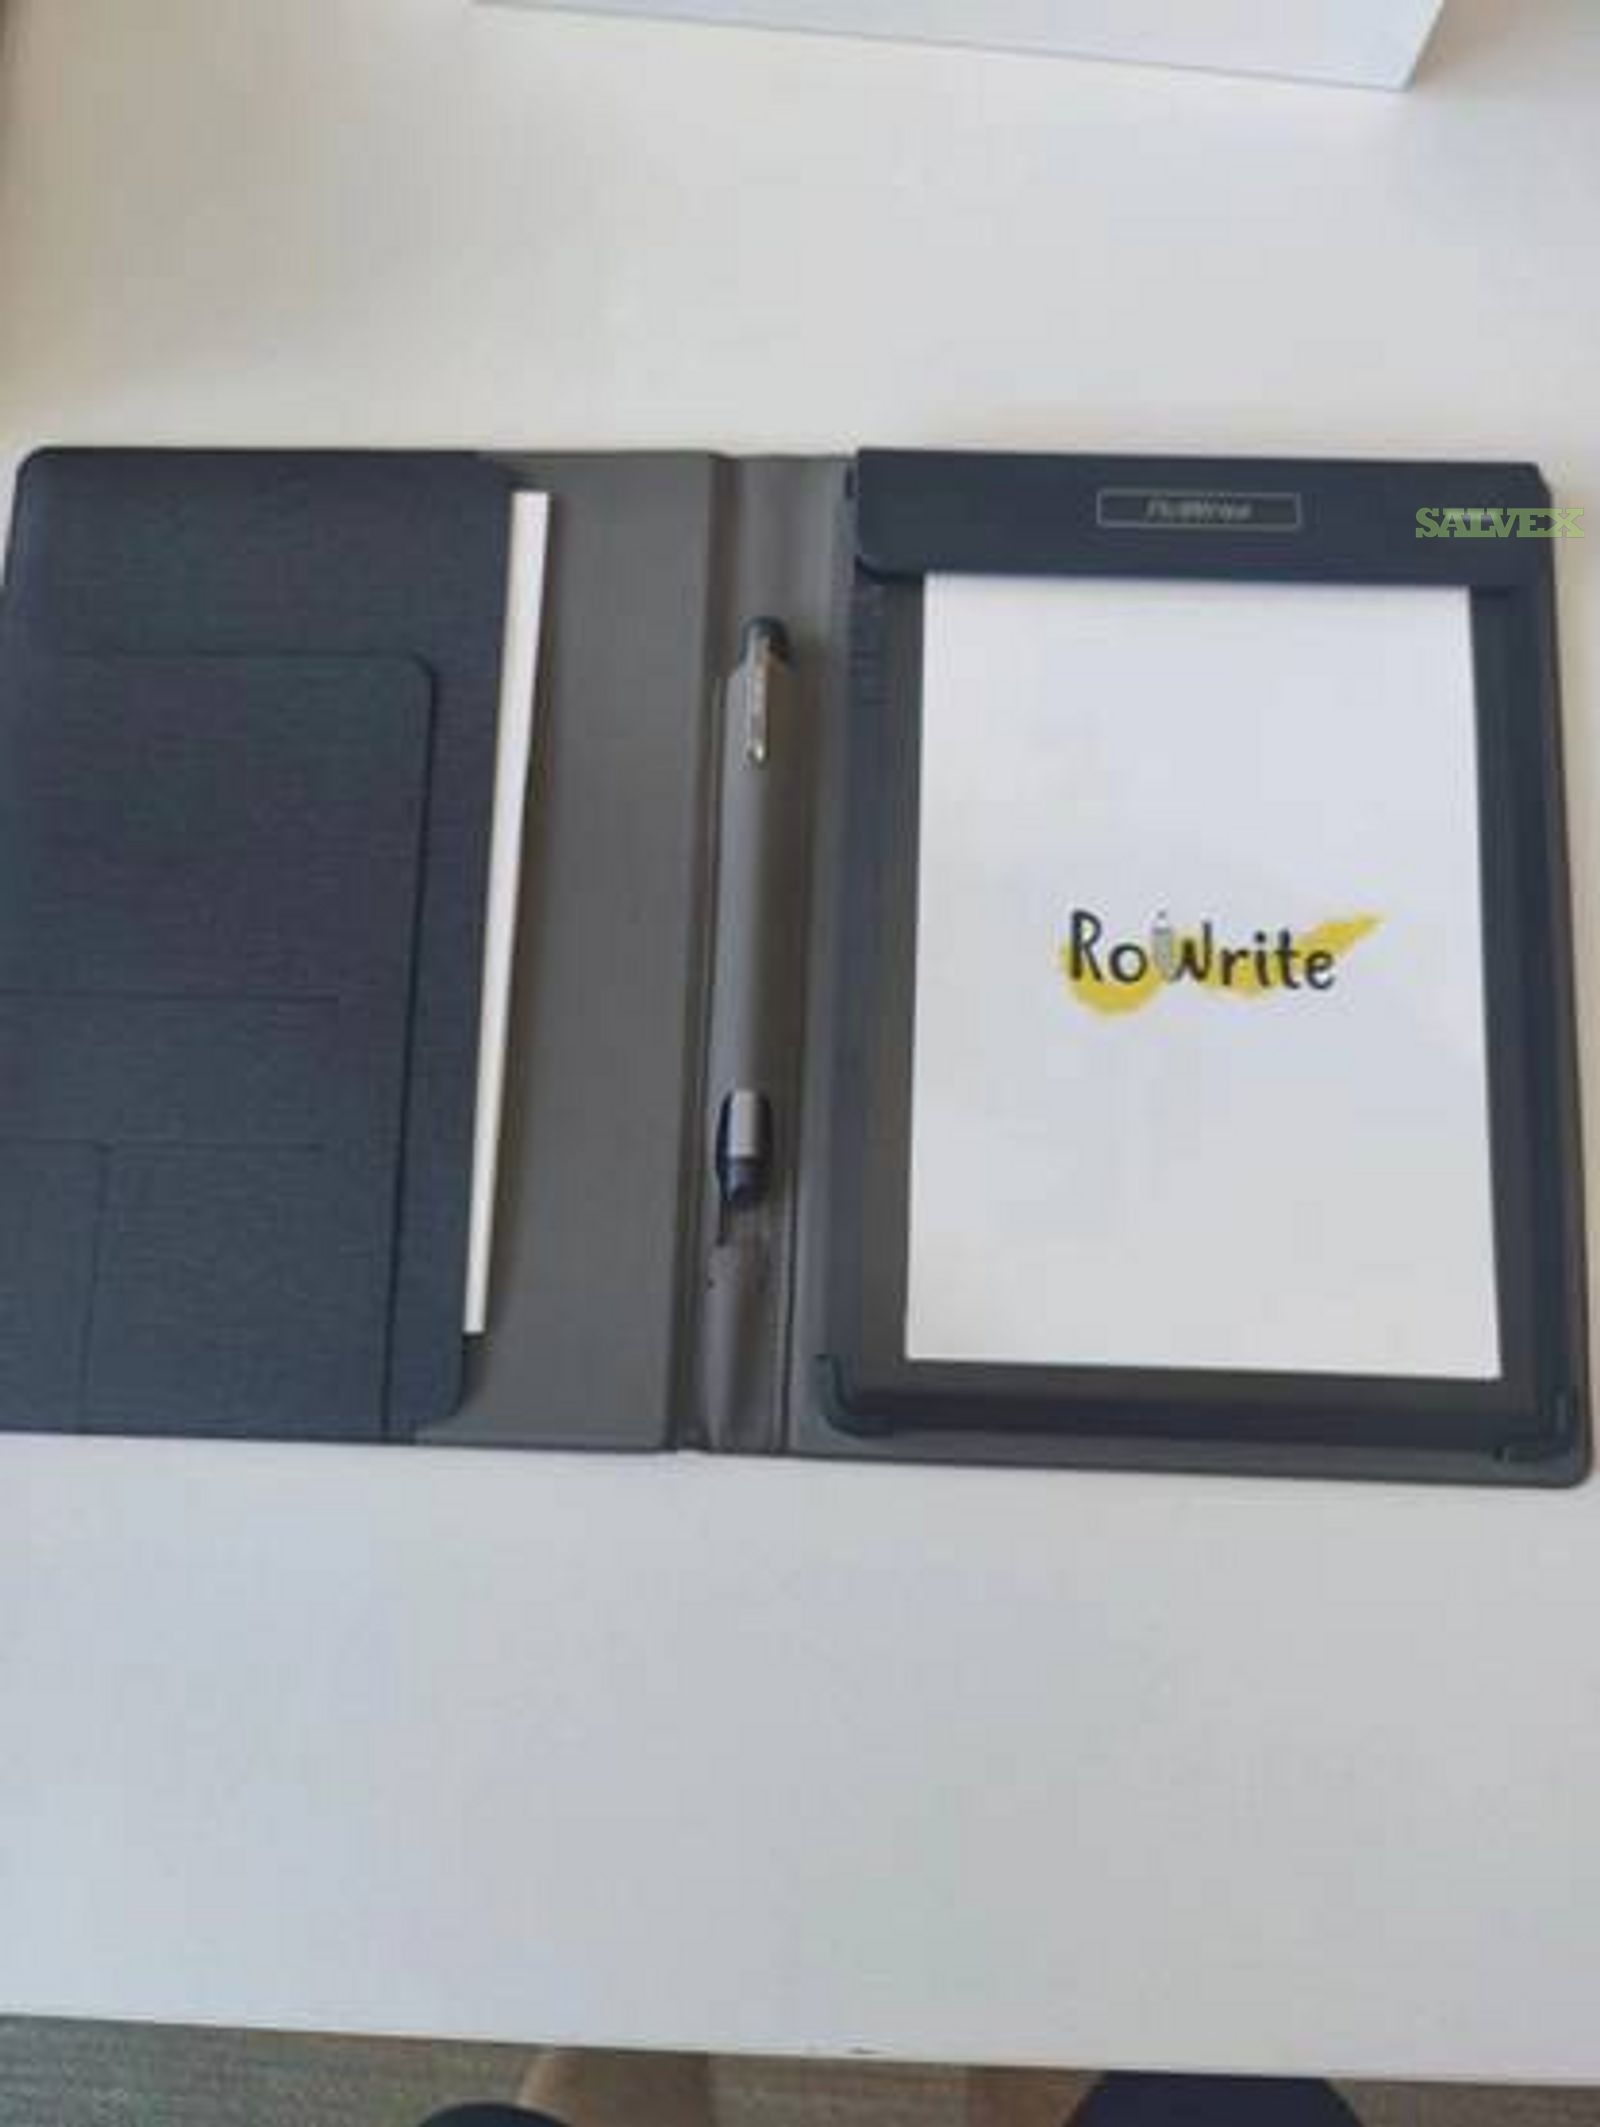 Royole RoWrite Smart Writing Pad/Notebook (3,244 Pieces)